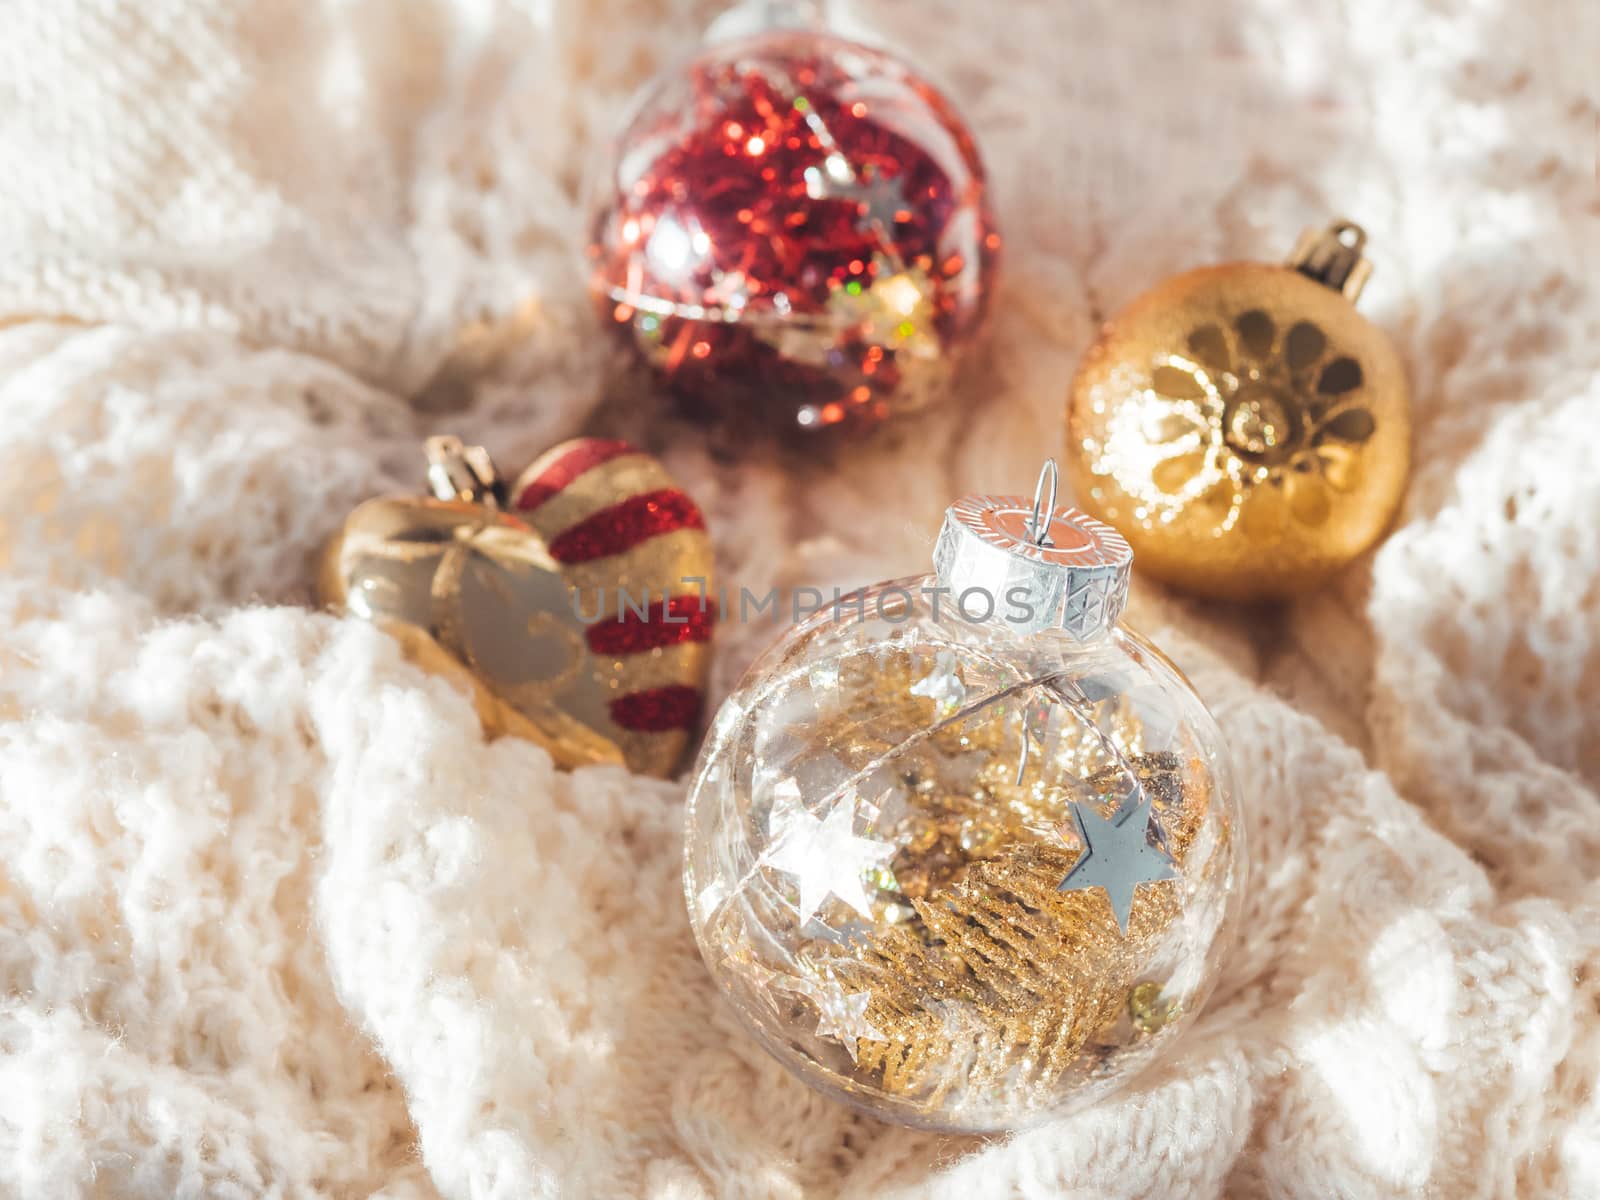 Decorative balls for Christmas tree on cable-knit sweater. Transparent sphere with red, golden spangles inside. Winter holiday spirit. New year celebration.